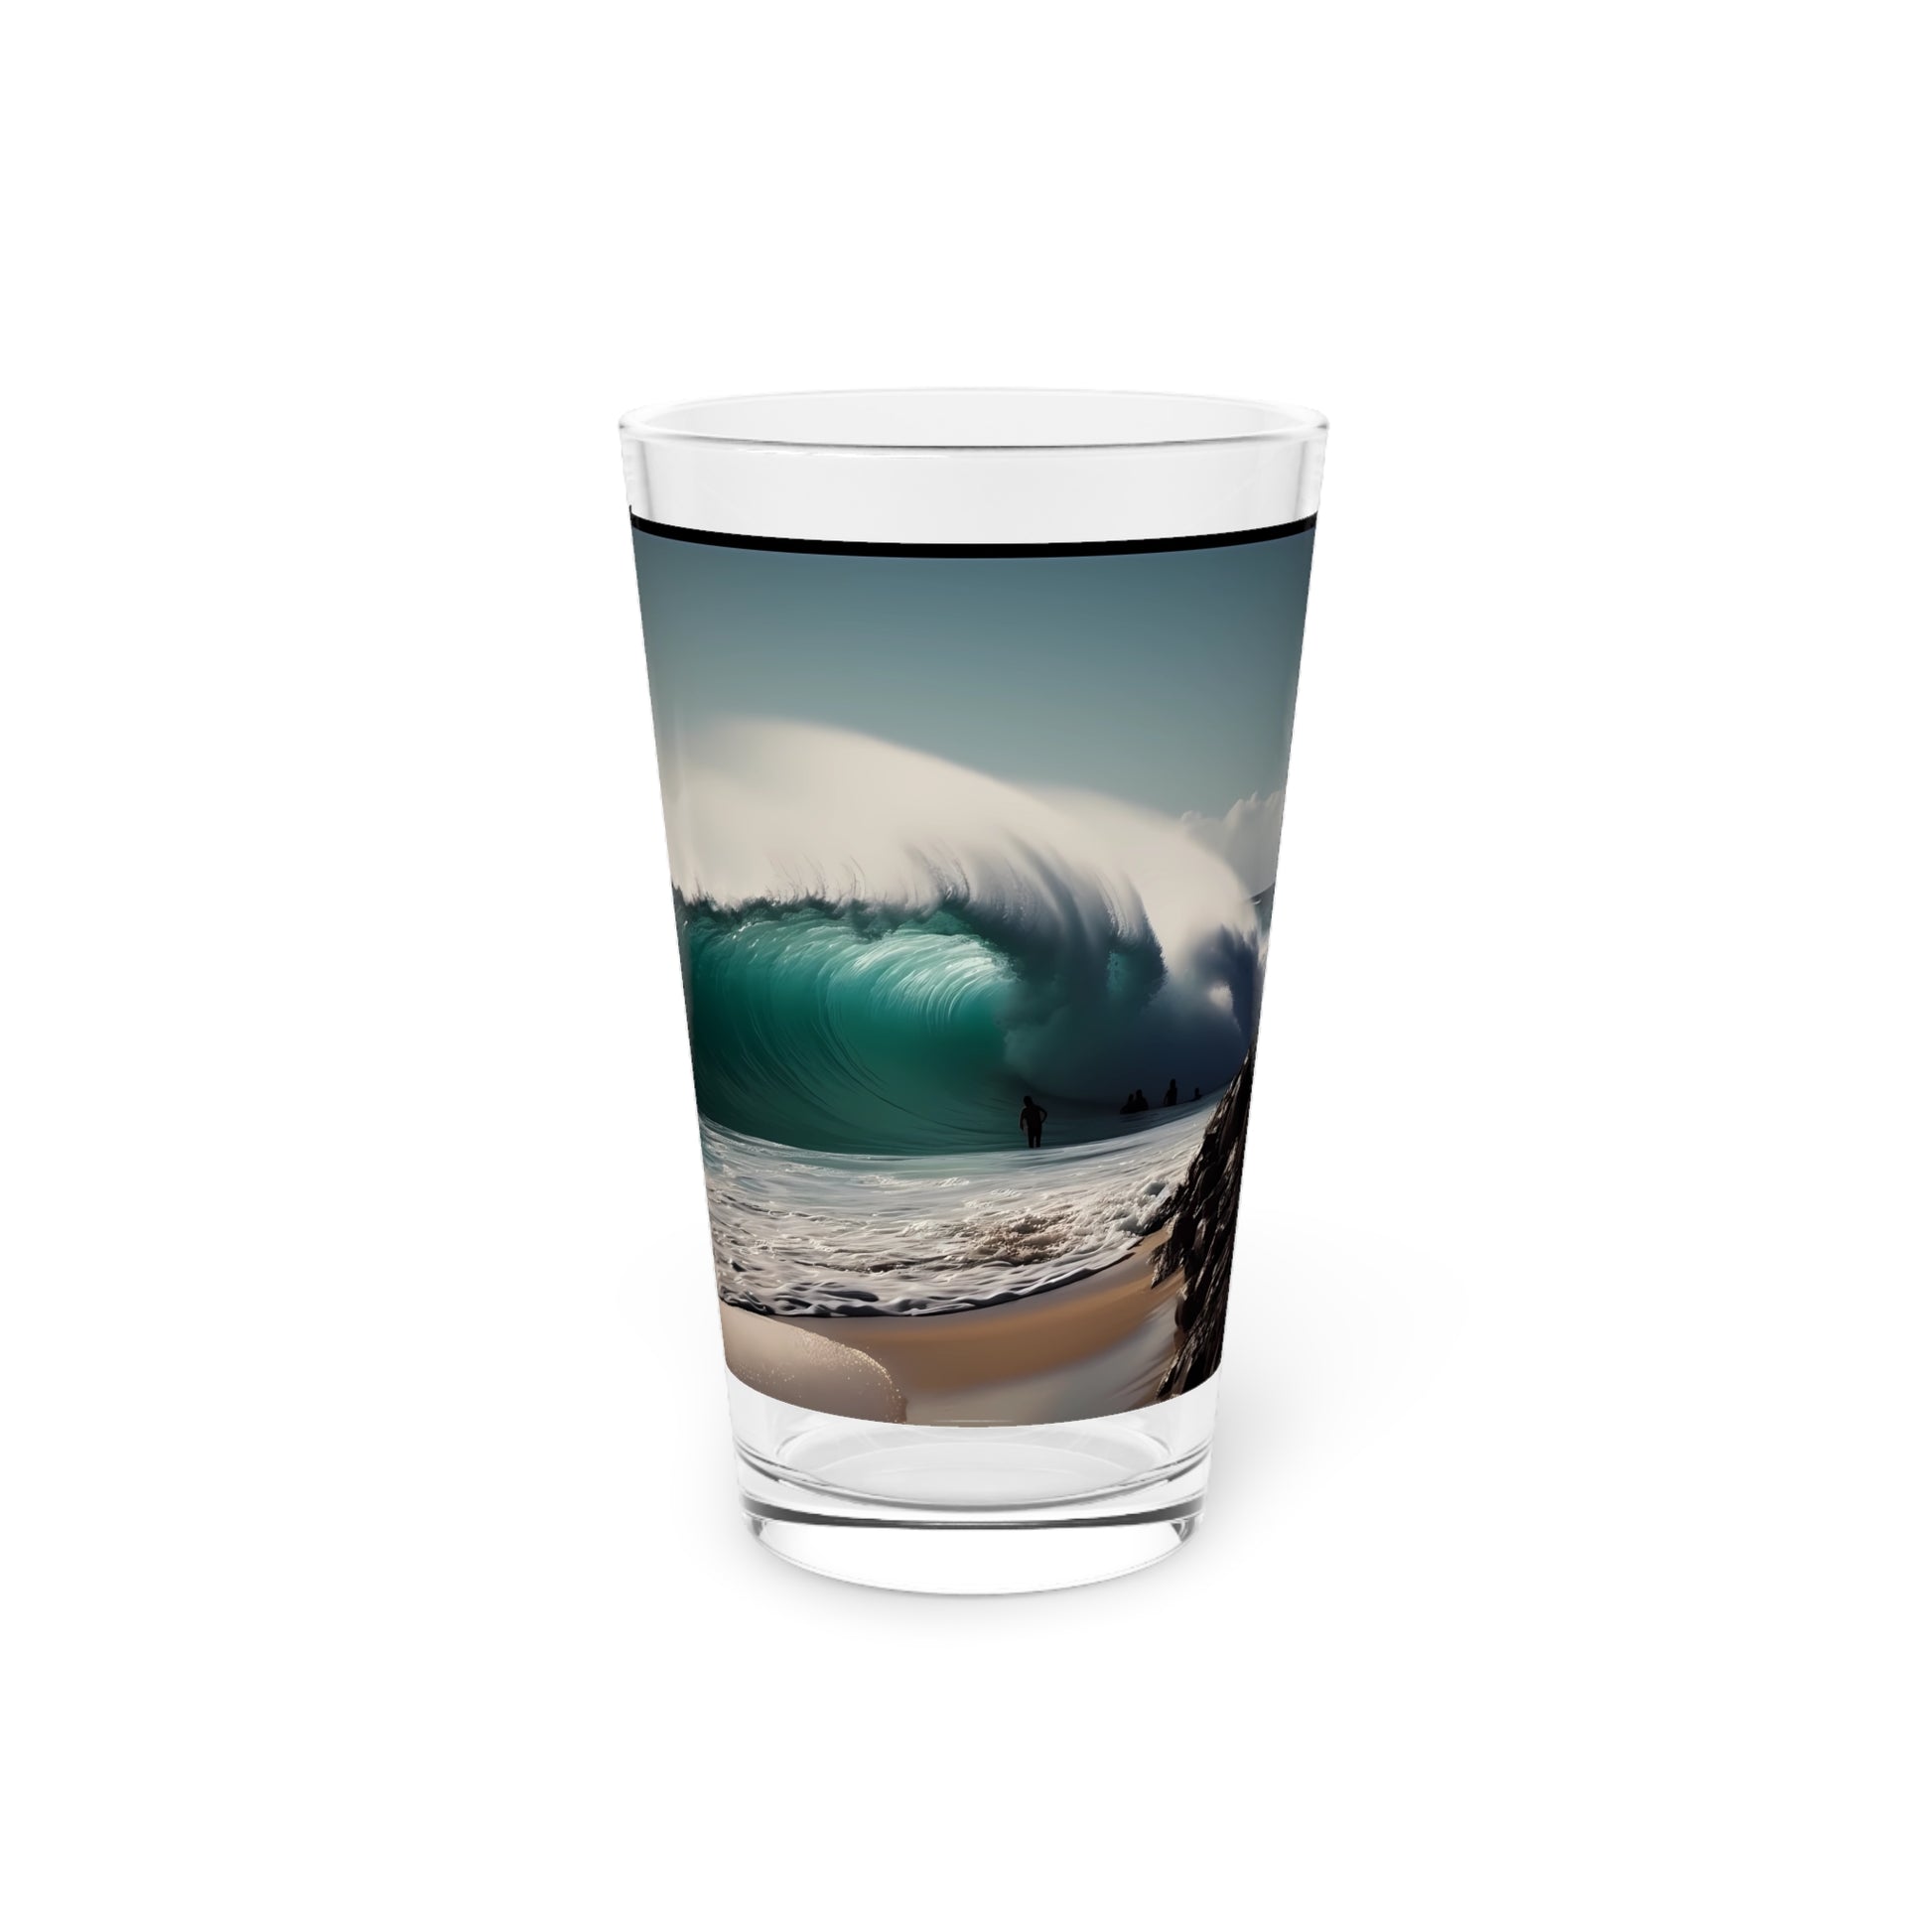 Surf the imagination with Pipeline: North Shore, Oahu Perfect Wave Pint Glass. Wave enthusiasts' dream, exclusively at Stashbox.ai.